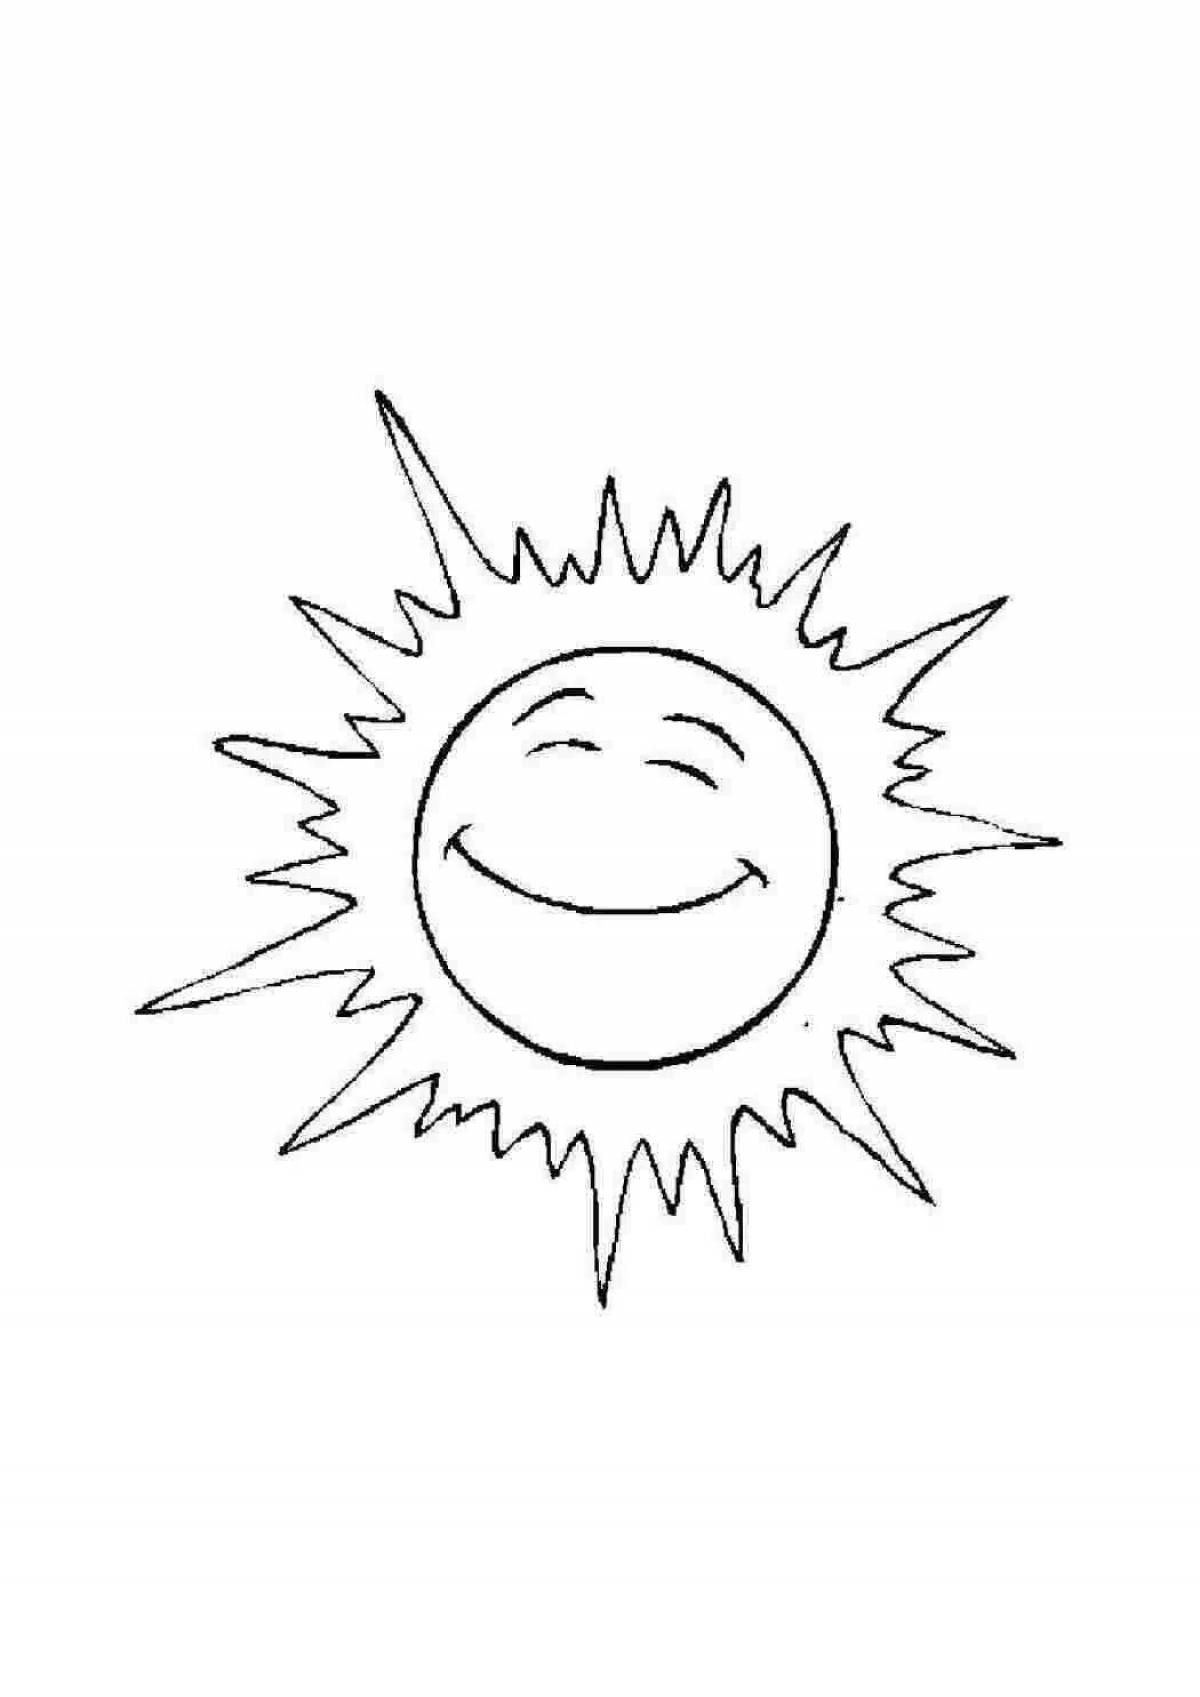 Radiant coloring page: the sun is shining